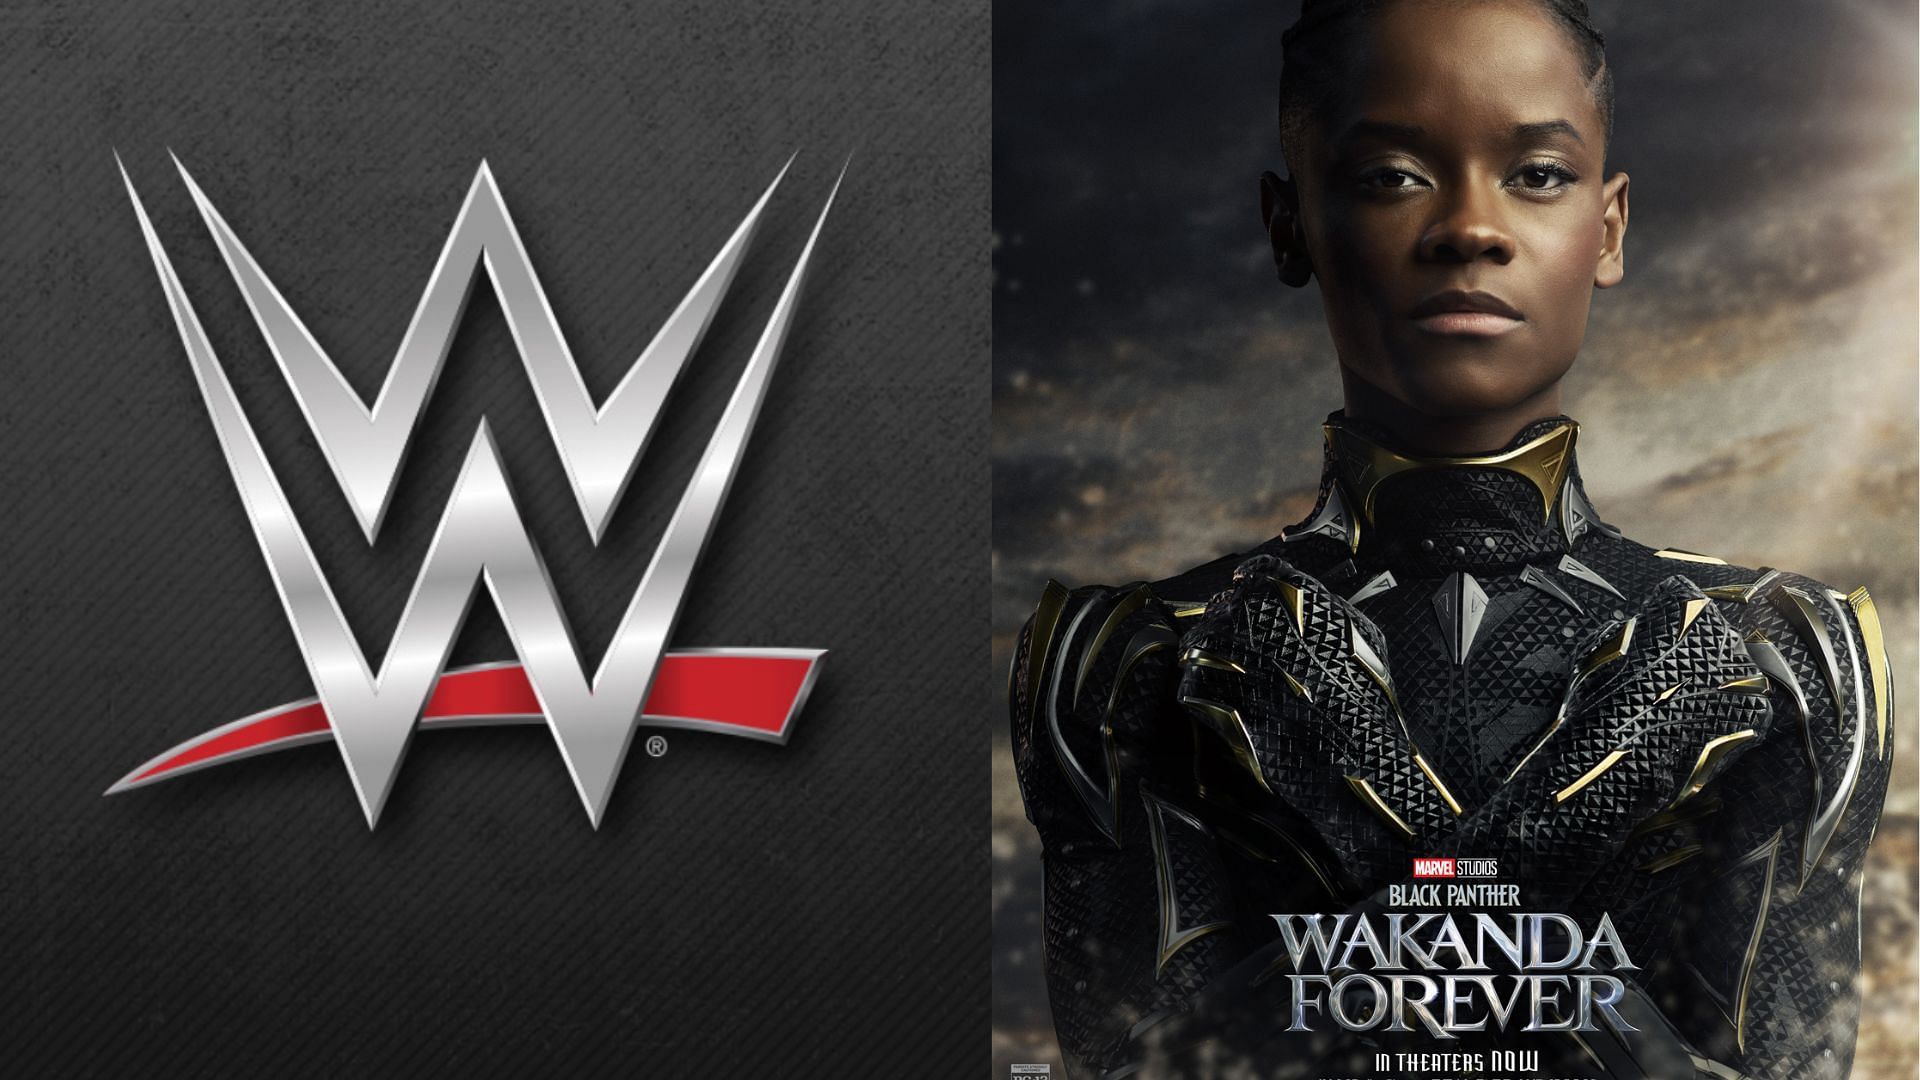 WWE Superstar was supposed to have a major role for Black Panther: Wakanda Forever